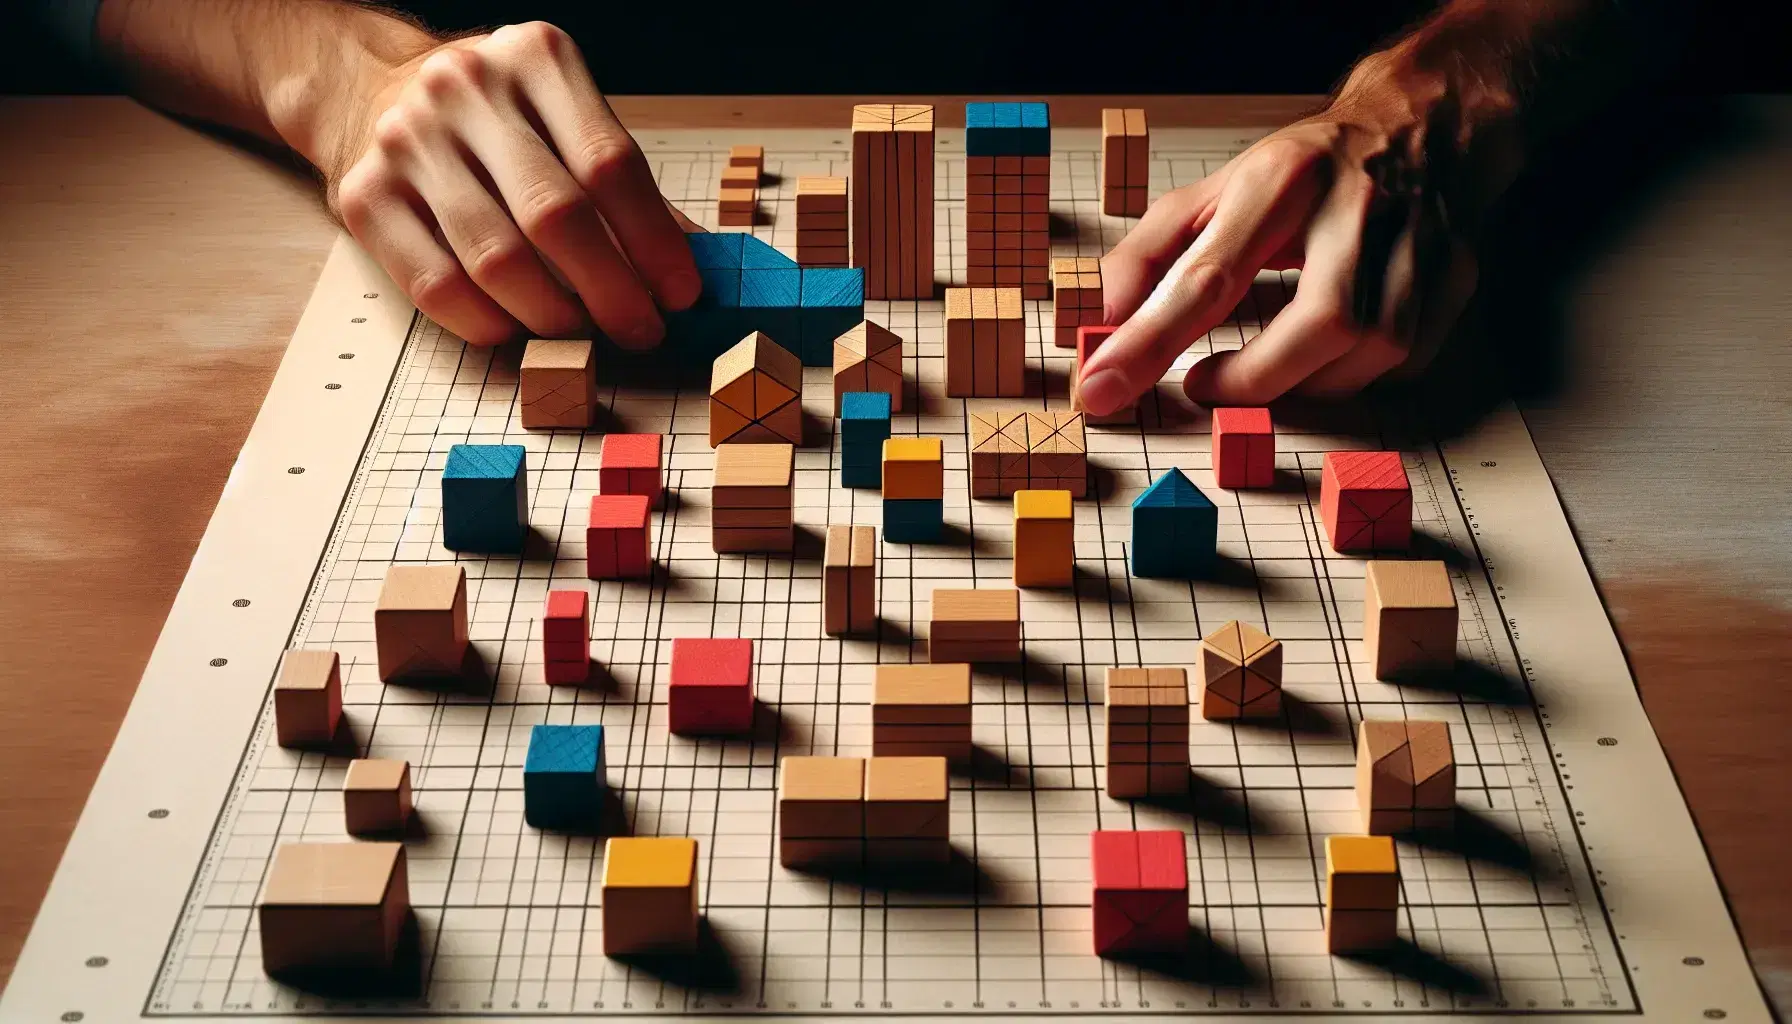 Hands arranging colorful wooden geometric blocks on a grid mat, creating a three-dimensional landscape of shapes.